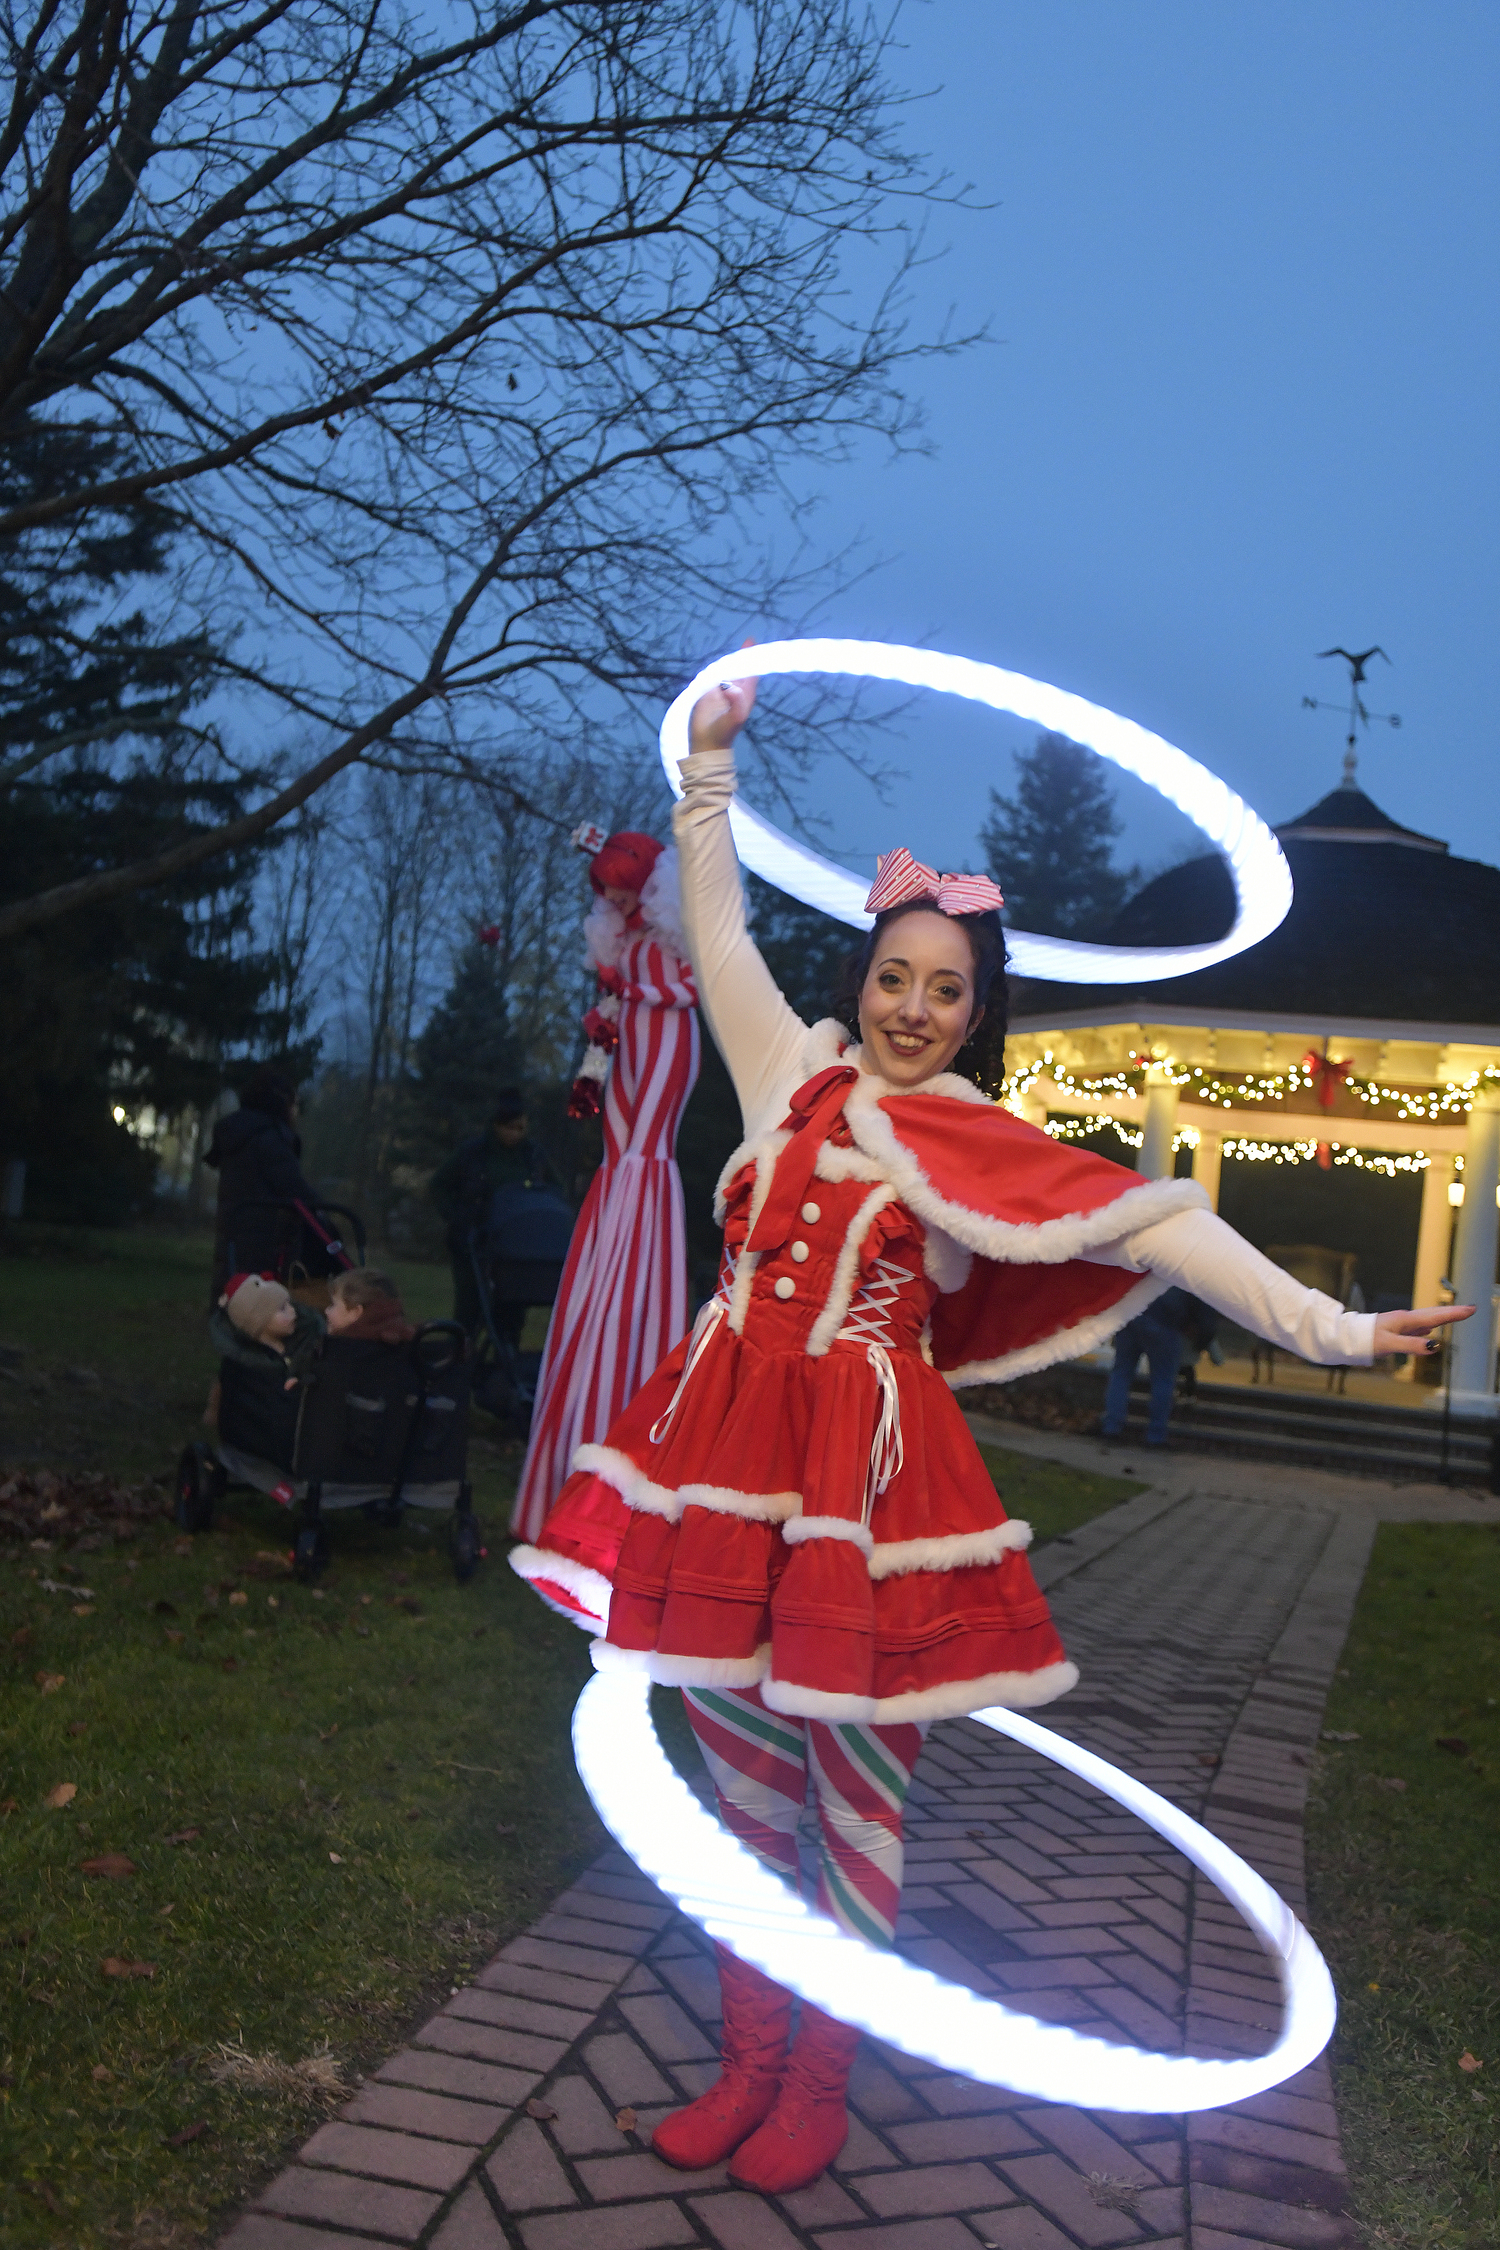 Emily Gandolfo welcomes visitors to the Westhampton Beach Village Green on Saturday evening.